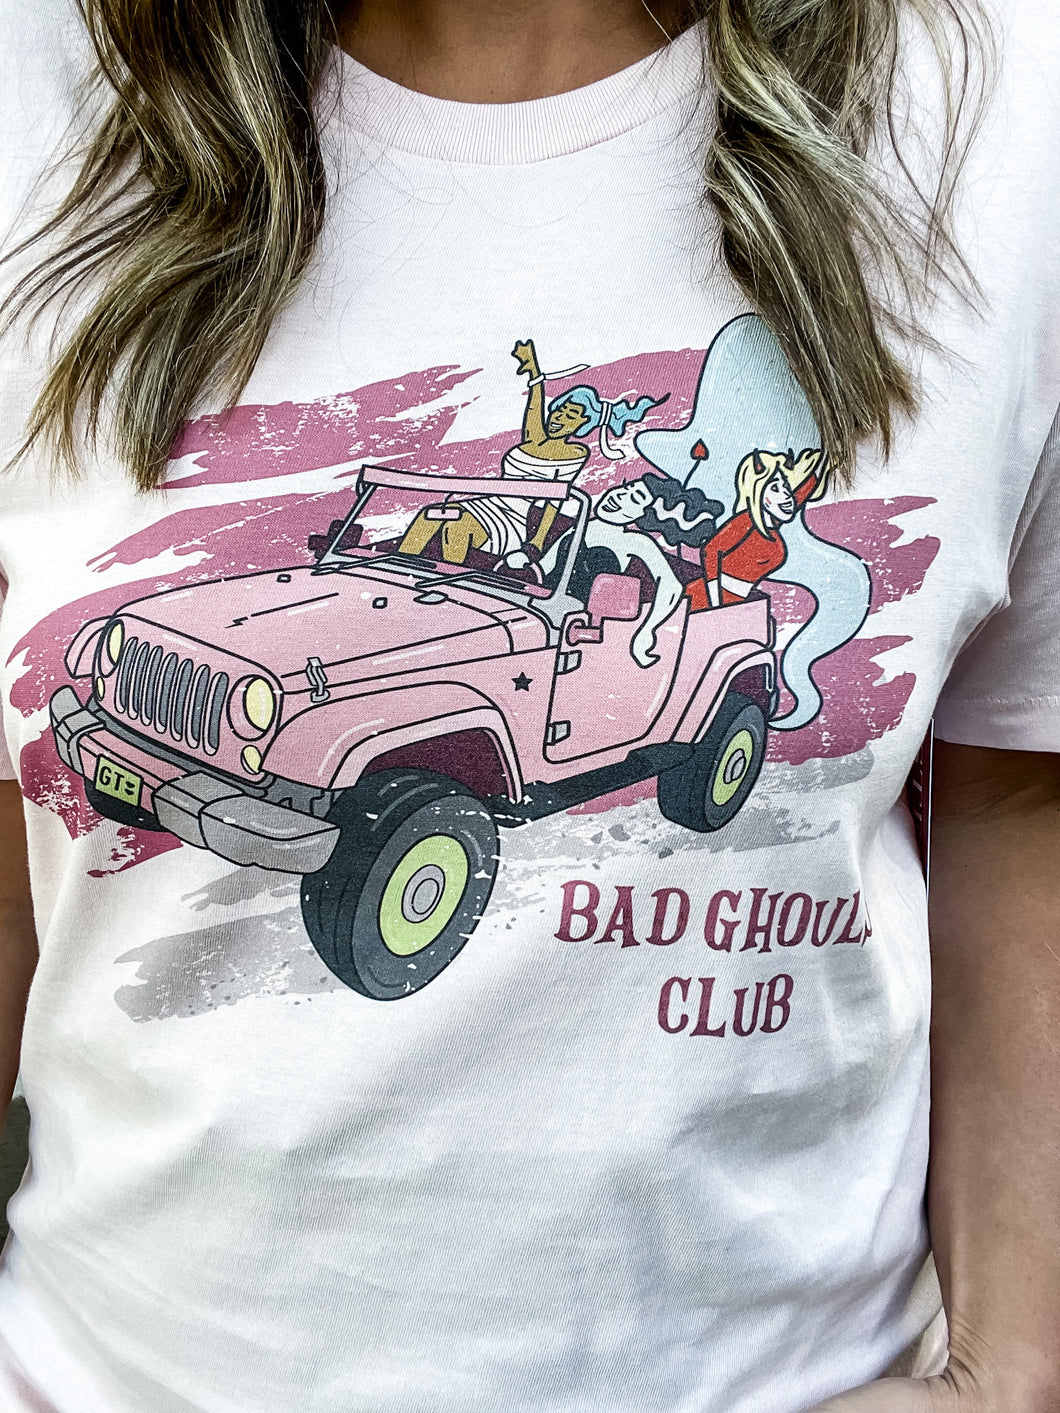 BAD GHOULS CLUB GRAPHIC TEE - SMALLS ONLY